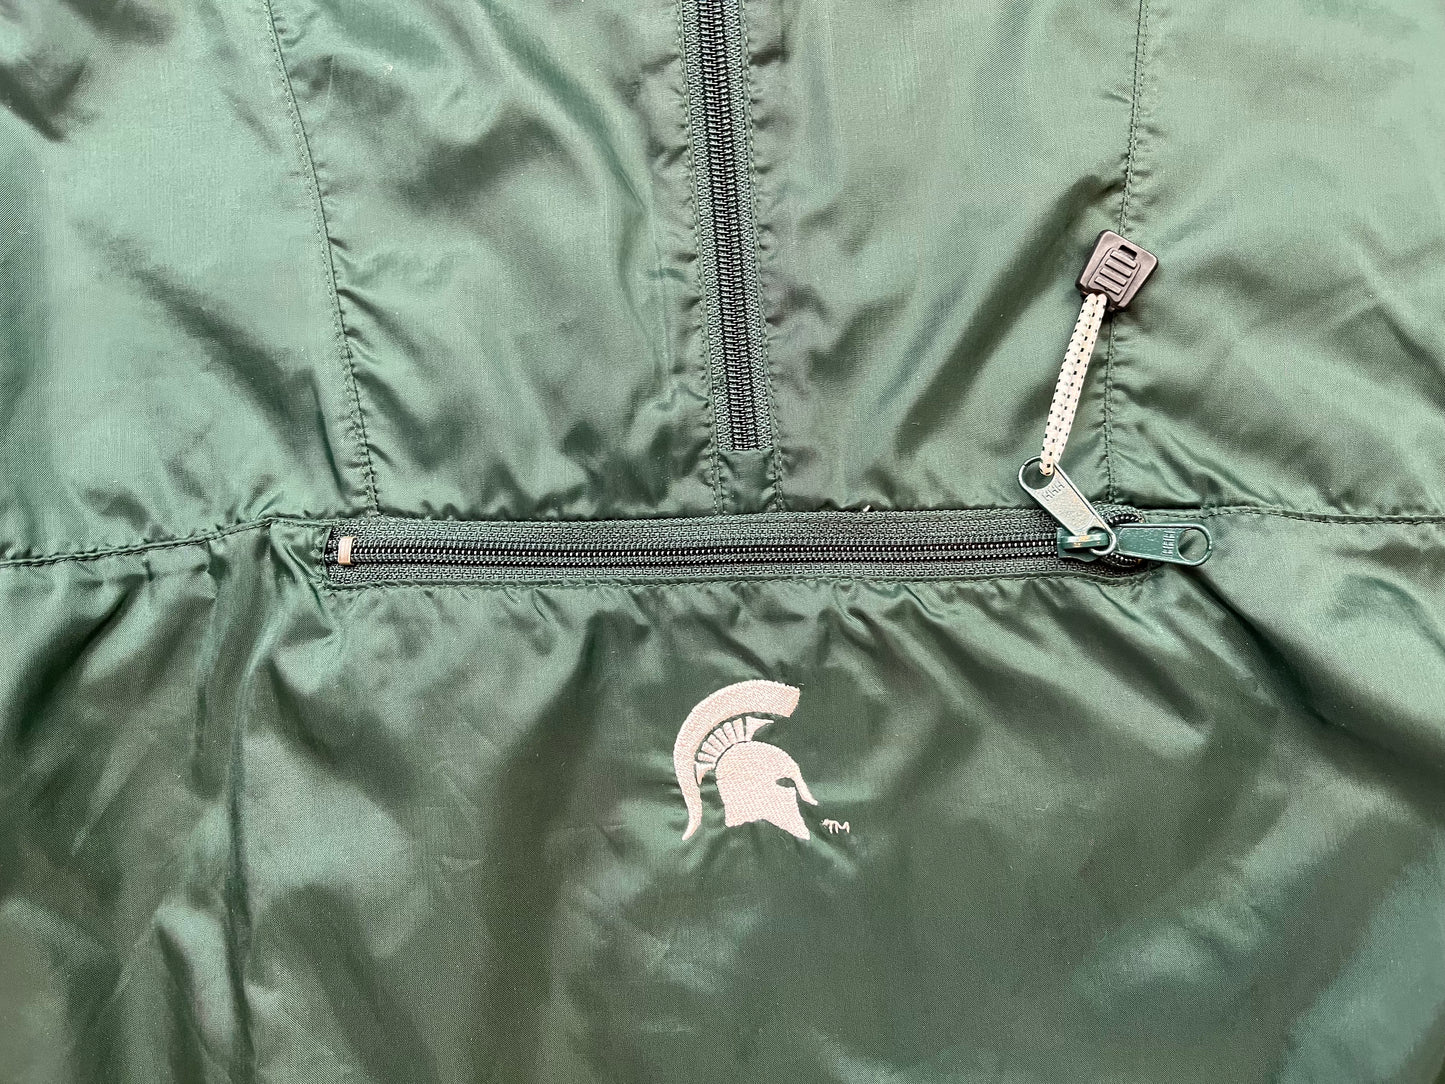 Michigan State Hooded Pullover